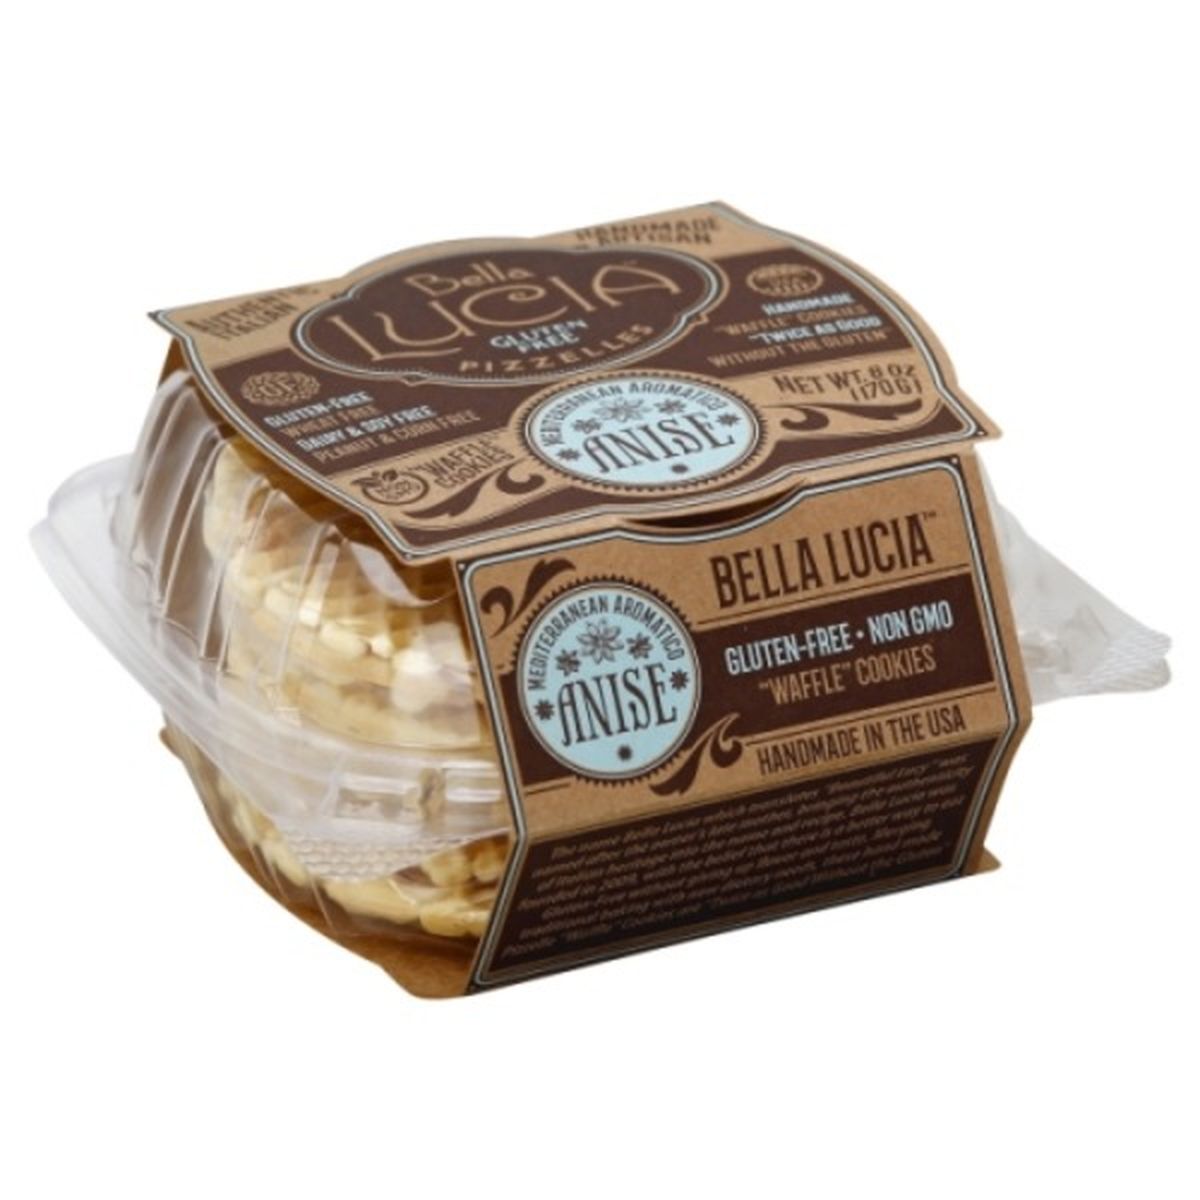 Calories in Bella Lucia Pizzelles, Gluten Free, Anise